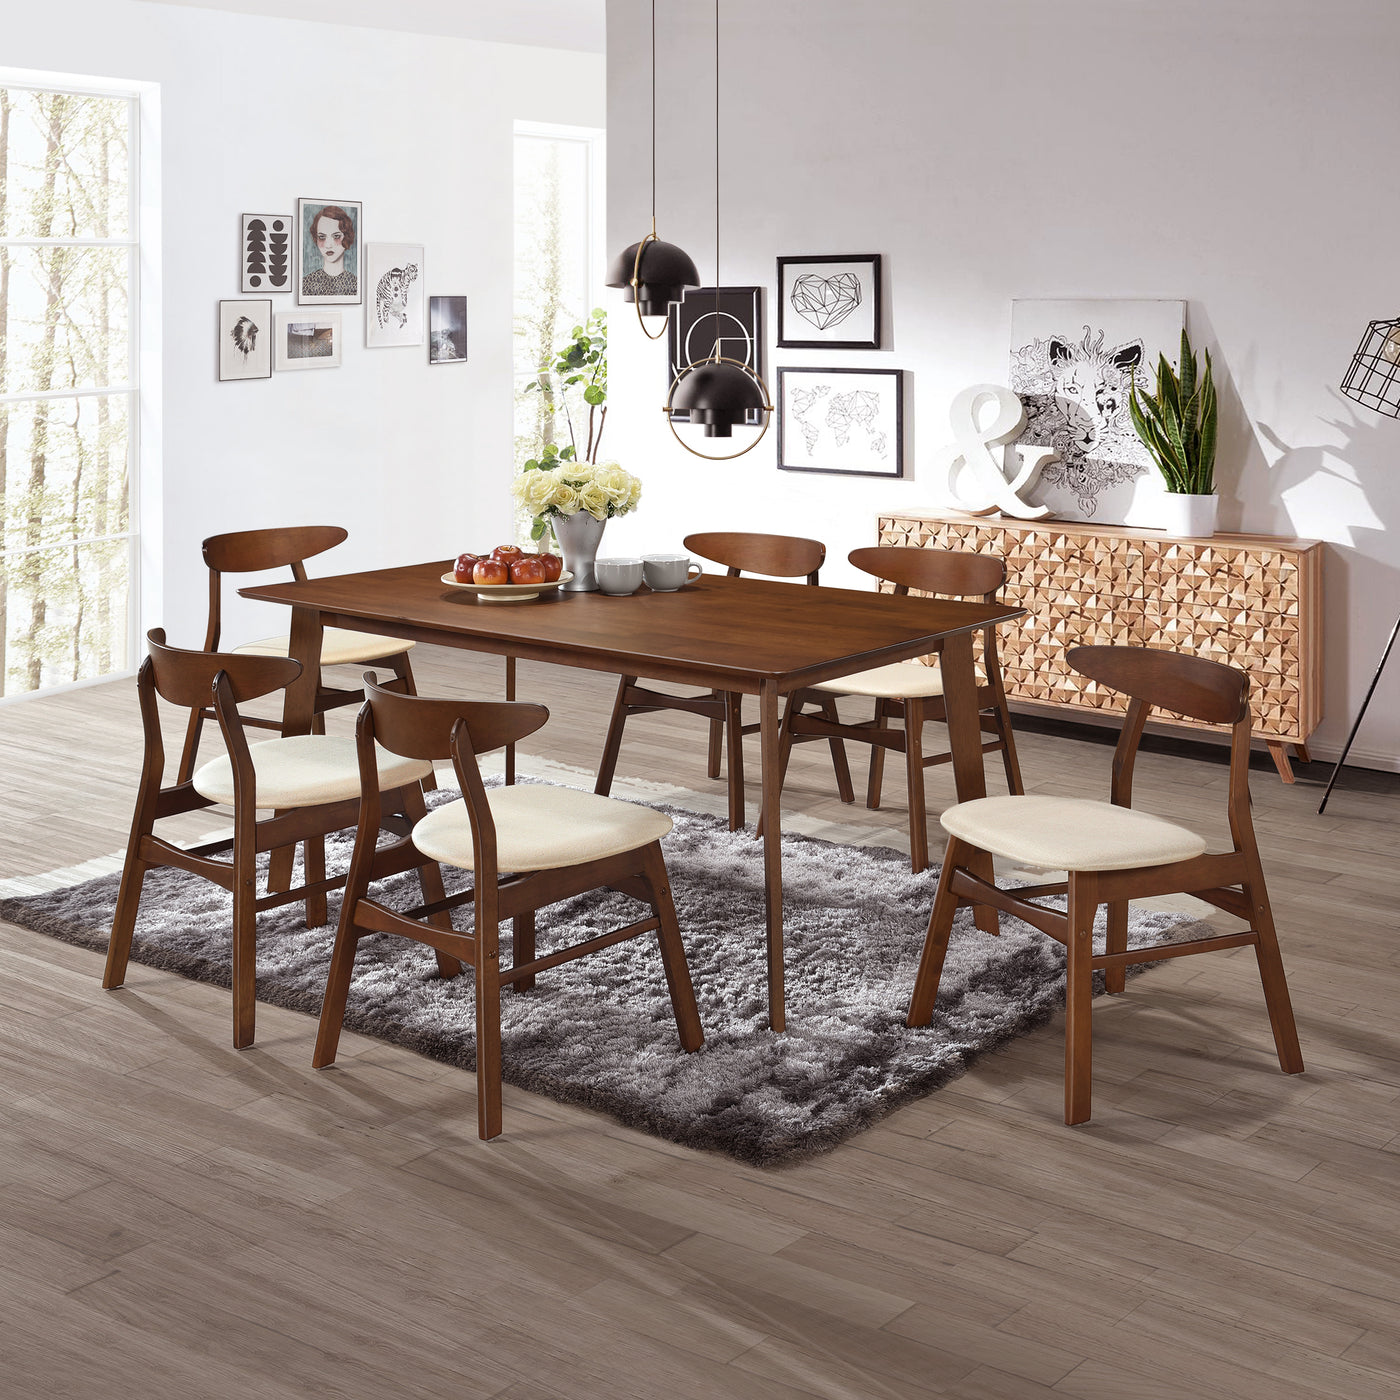 Lalia 7-Piece Solid Wood Upholstered Chair and Dining Table Set